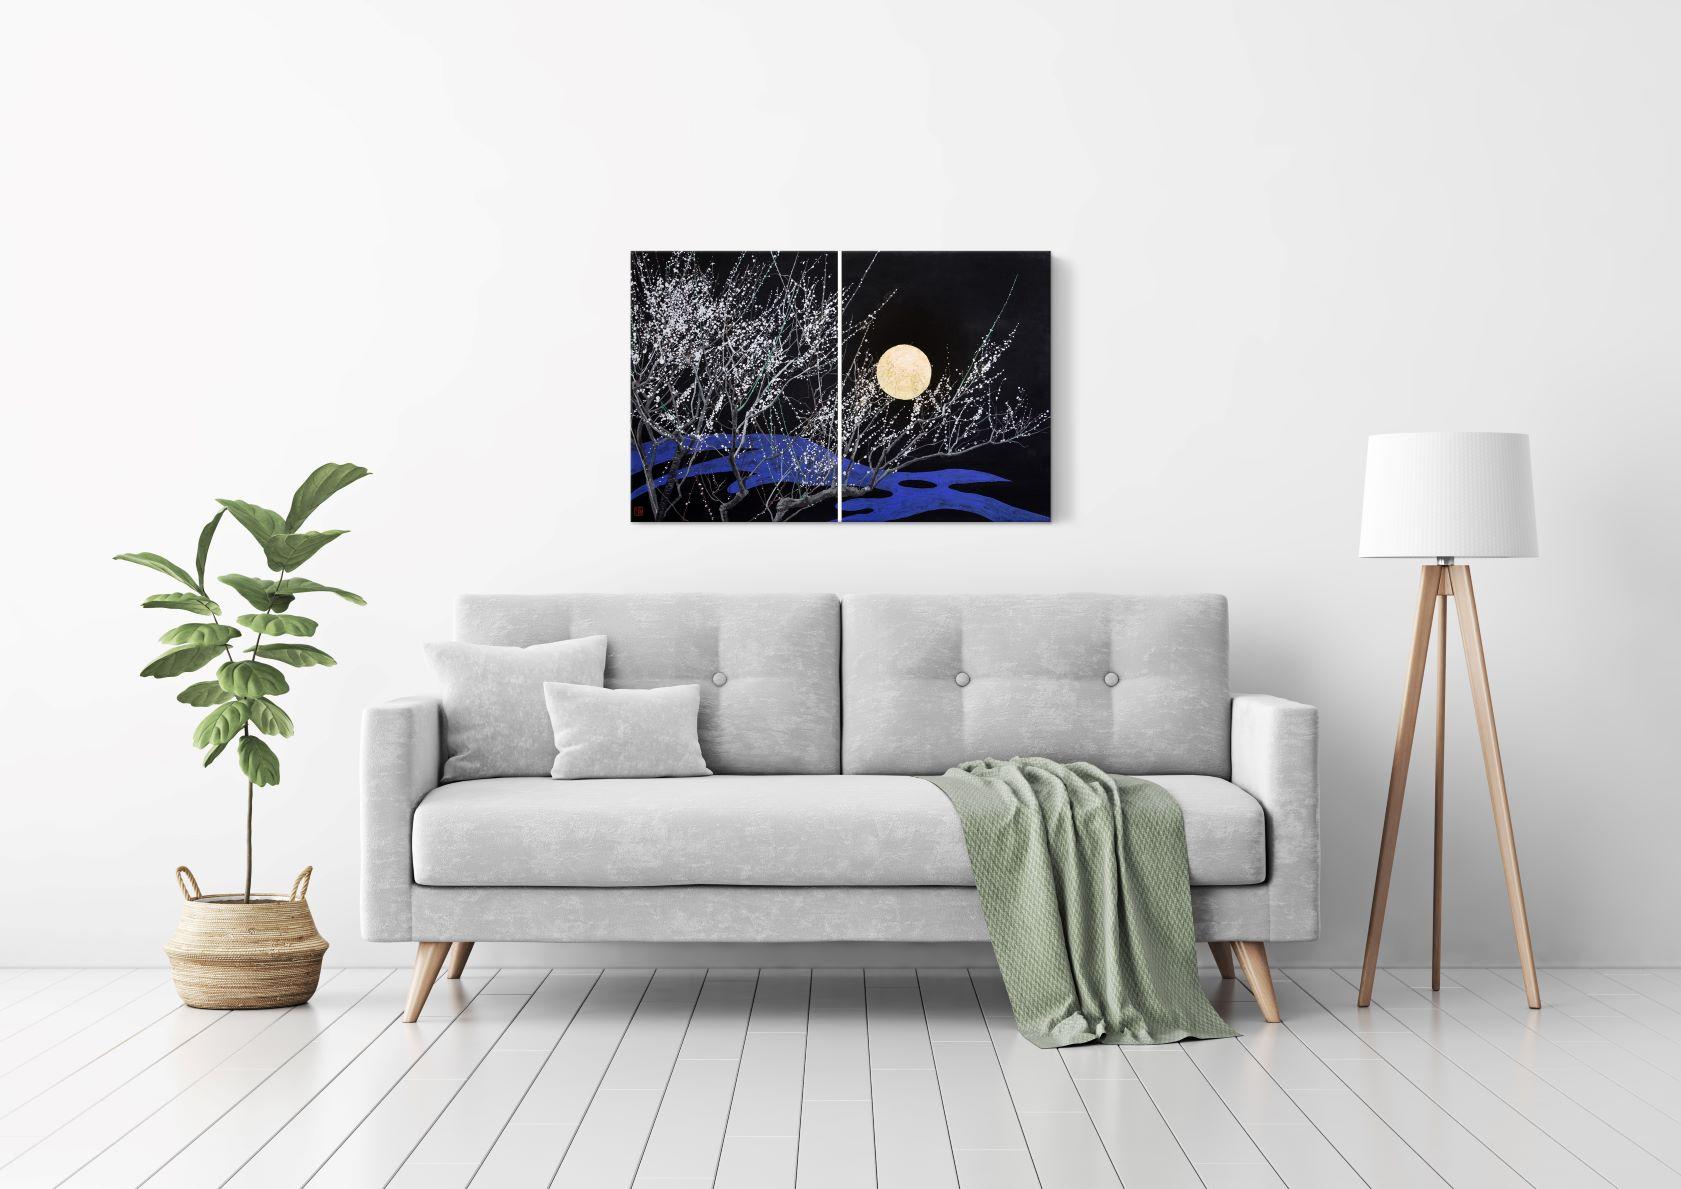 Nocturn IV by Lumi Mizutani - Japanese landscape painting, gold leaf, tree, moon For Sale 7